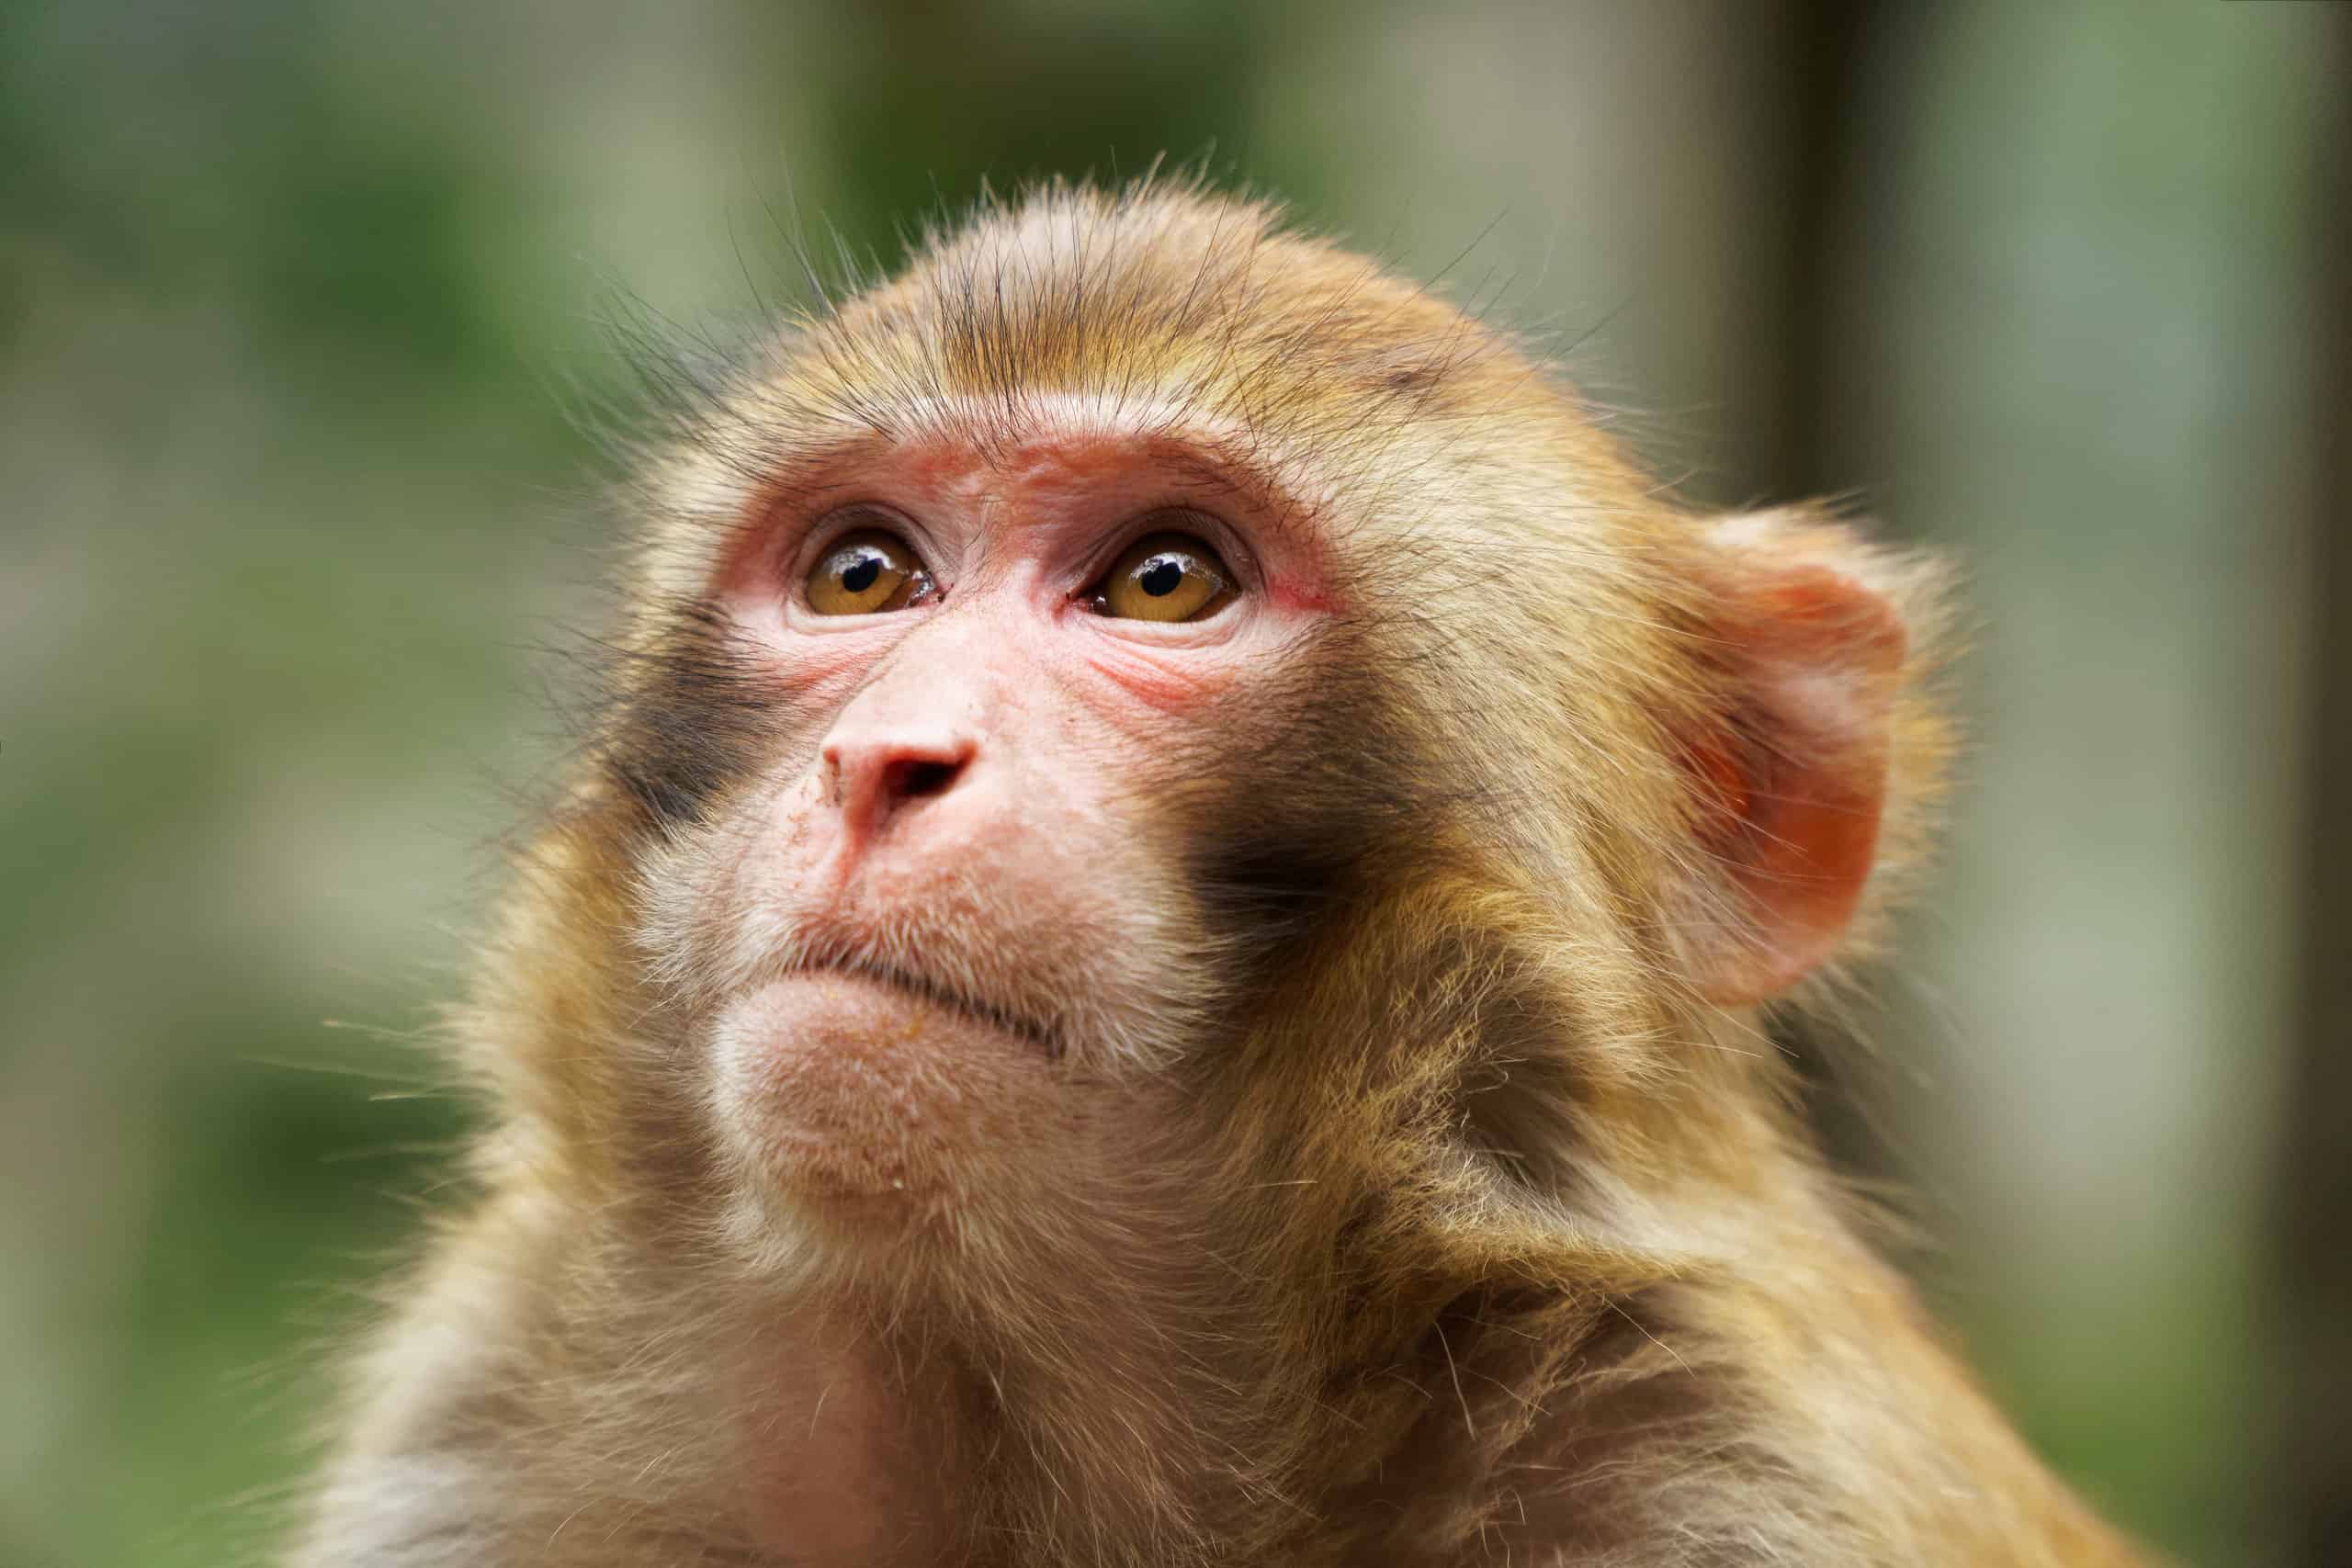 Monkeys are Smarter Than We Thought